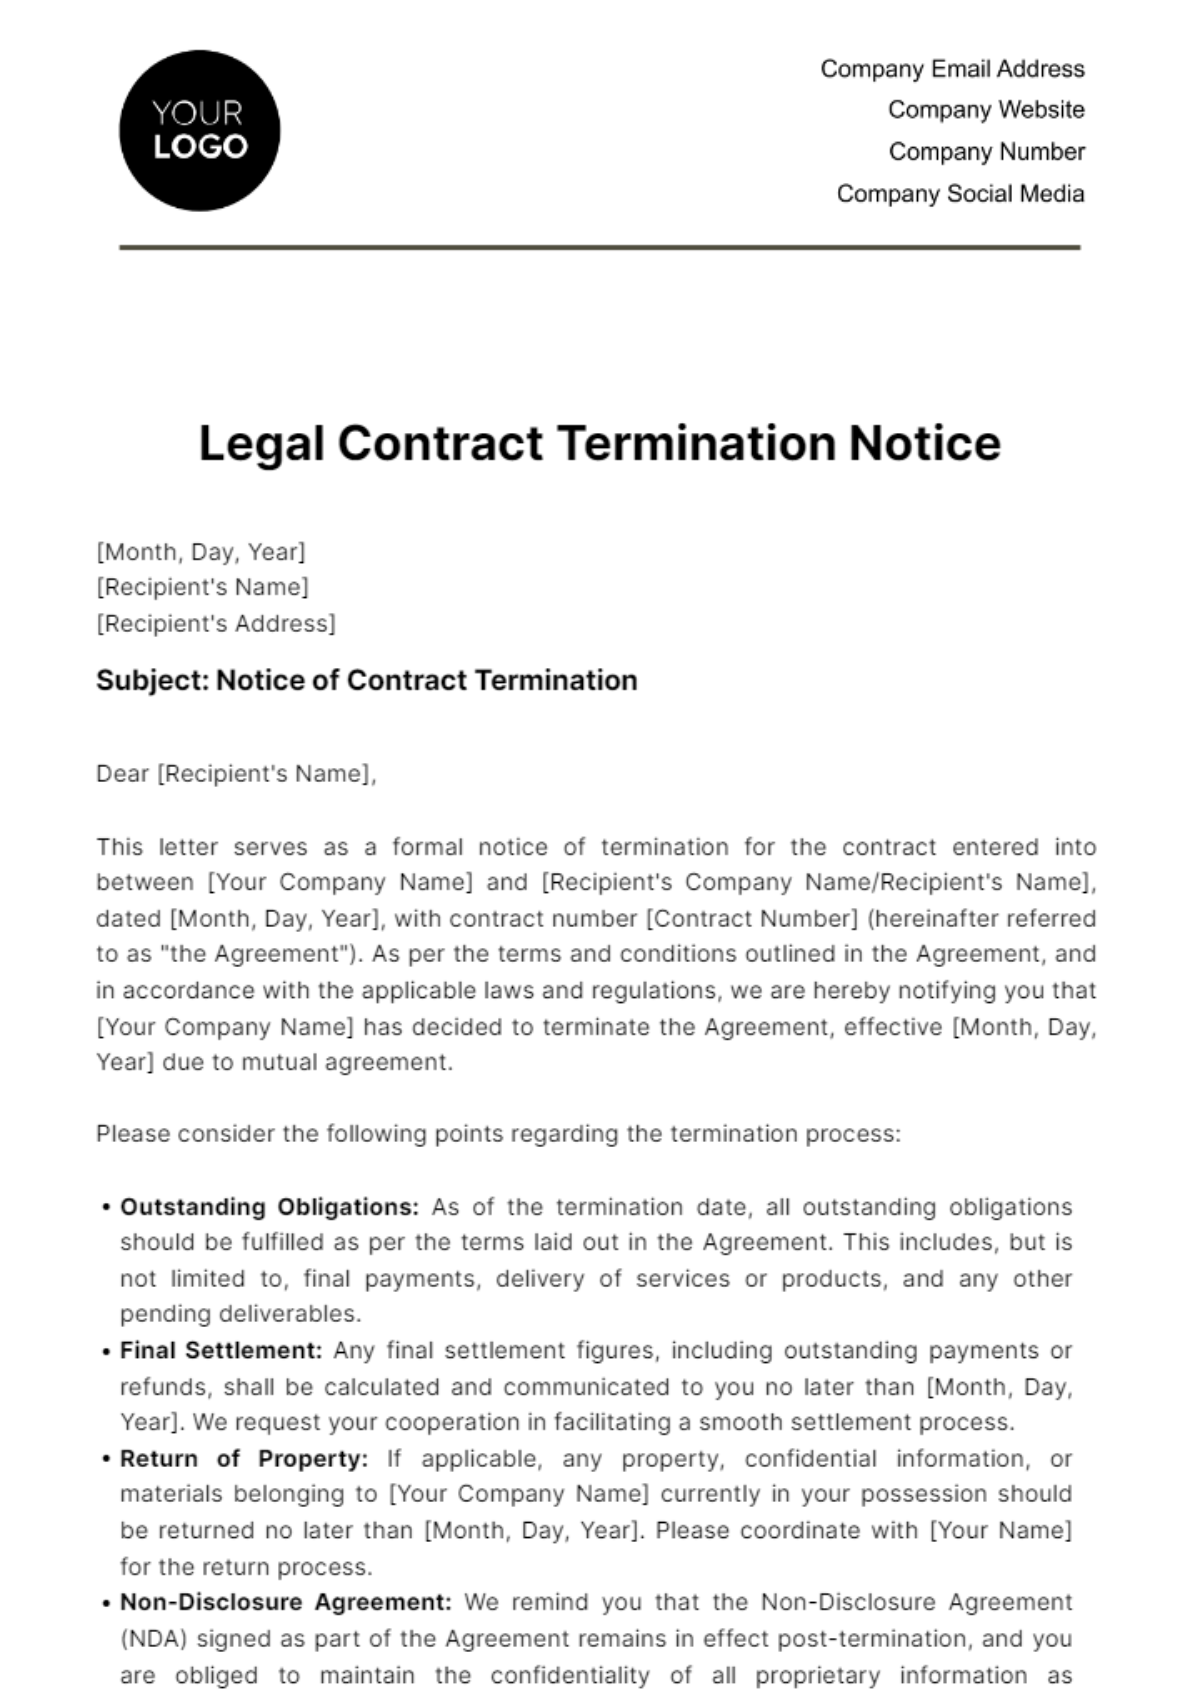 Legal Contract Termination Notice Template